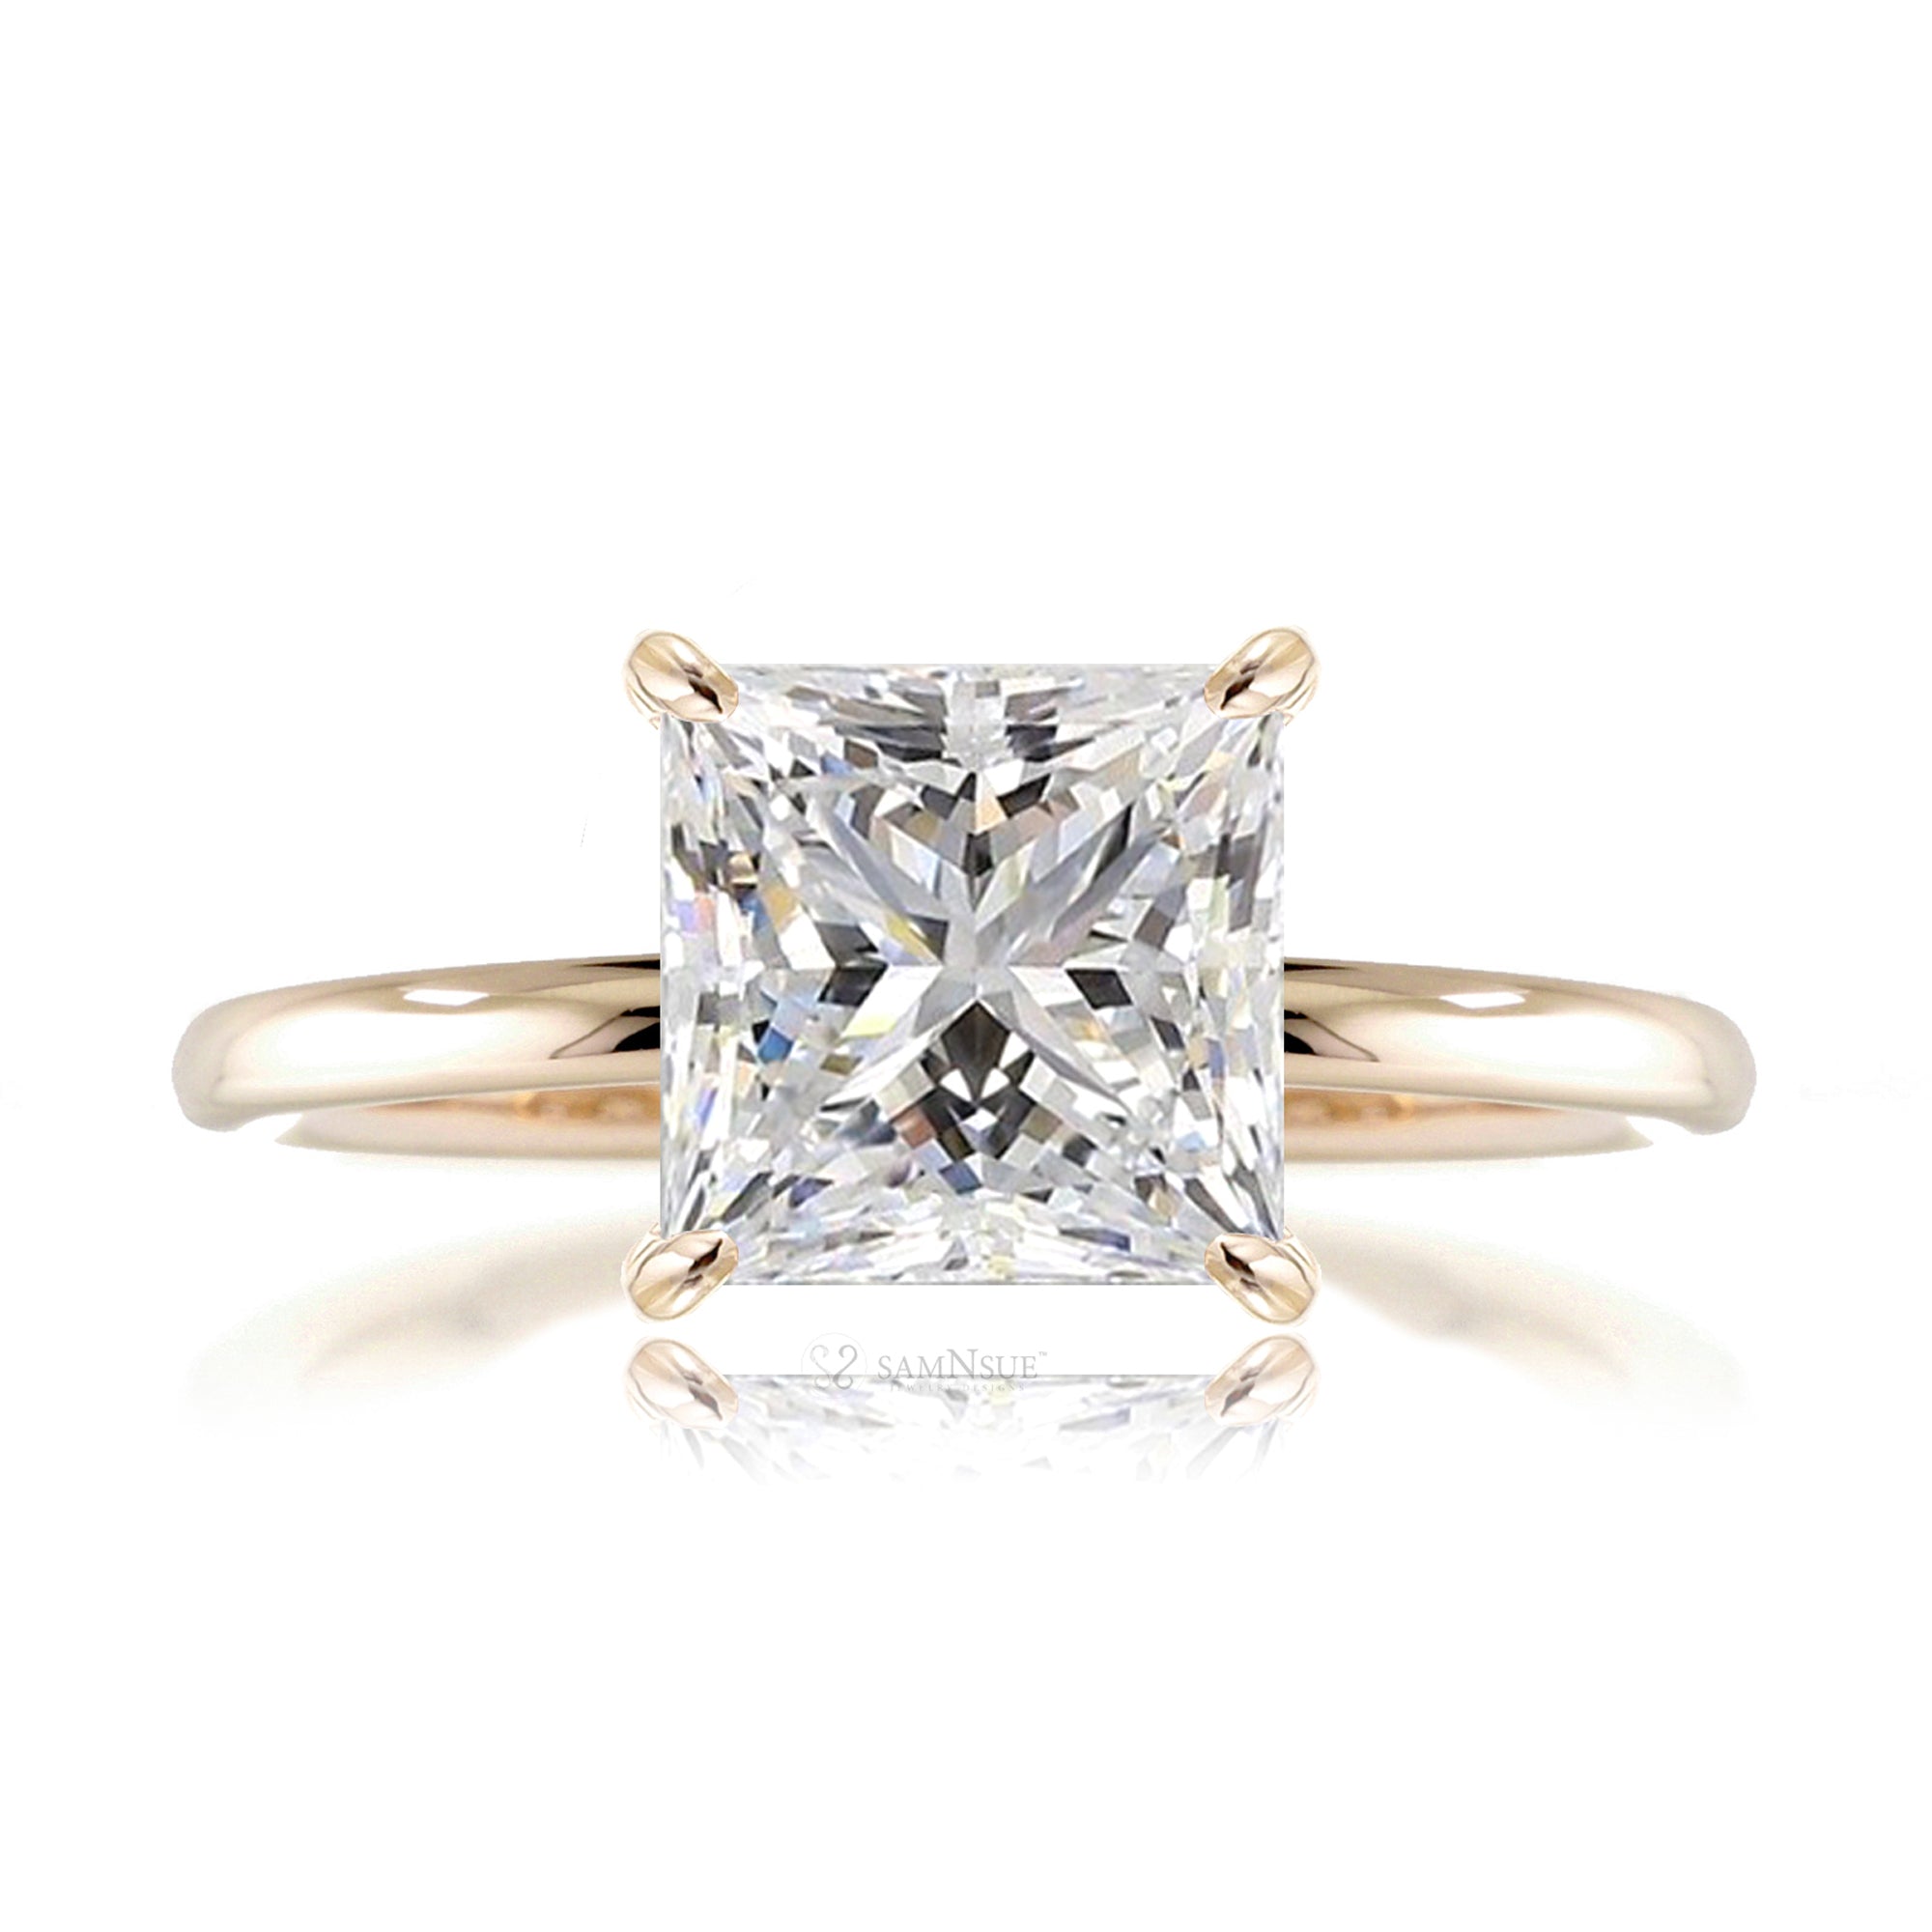 Princess cut lab-grown diamond engagement ring yellow gold - The Ava solid band